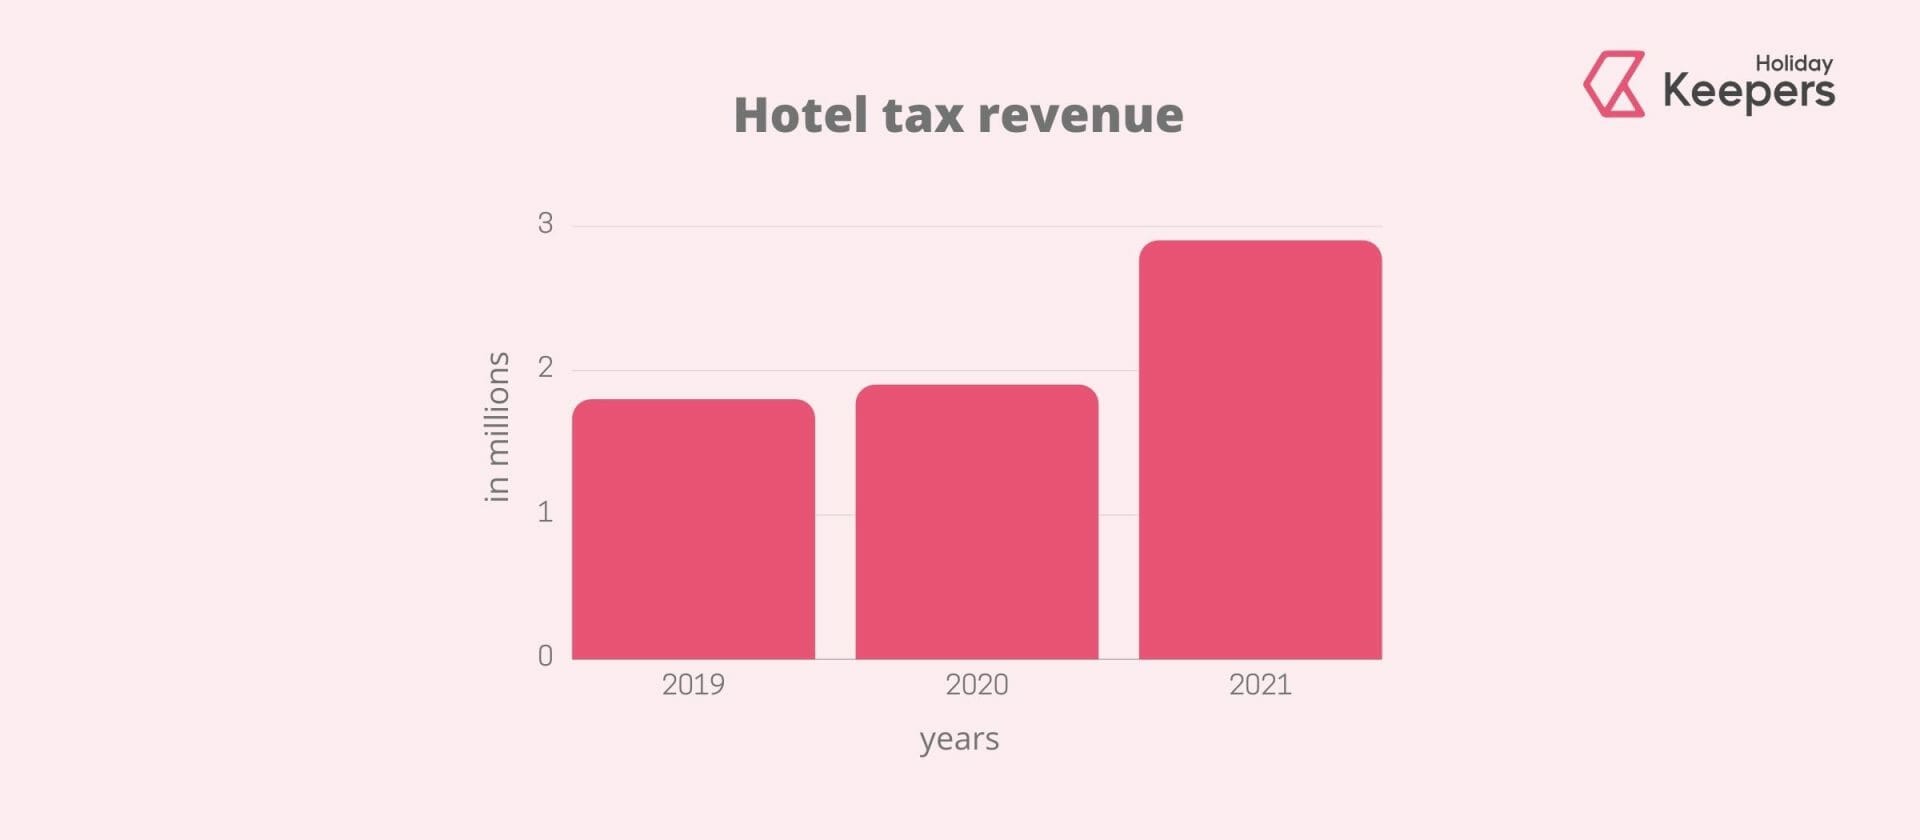 Poconos Hotel tax revenue infographic Holidaykeepers